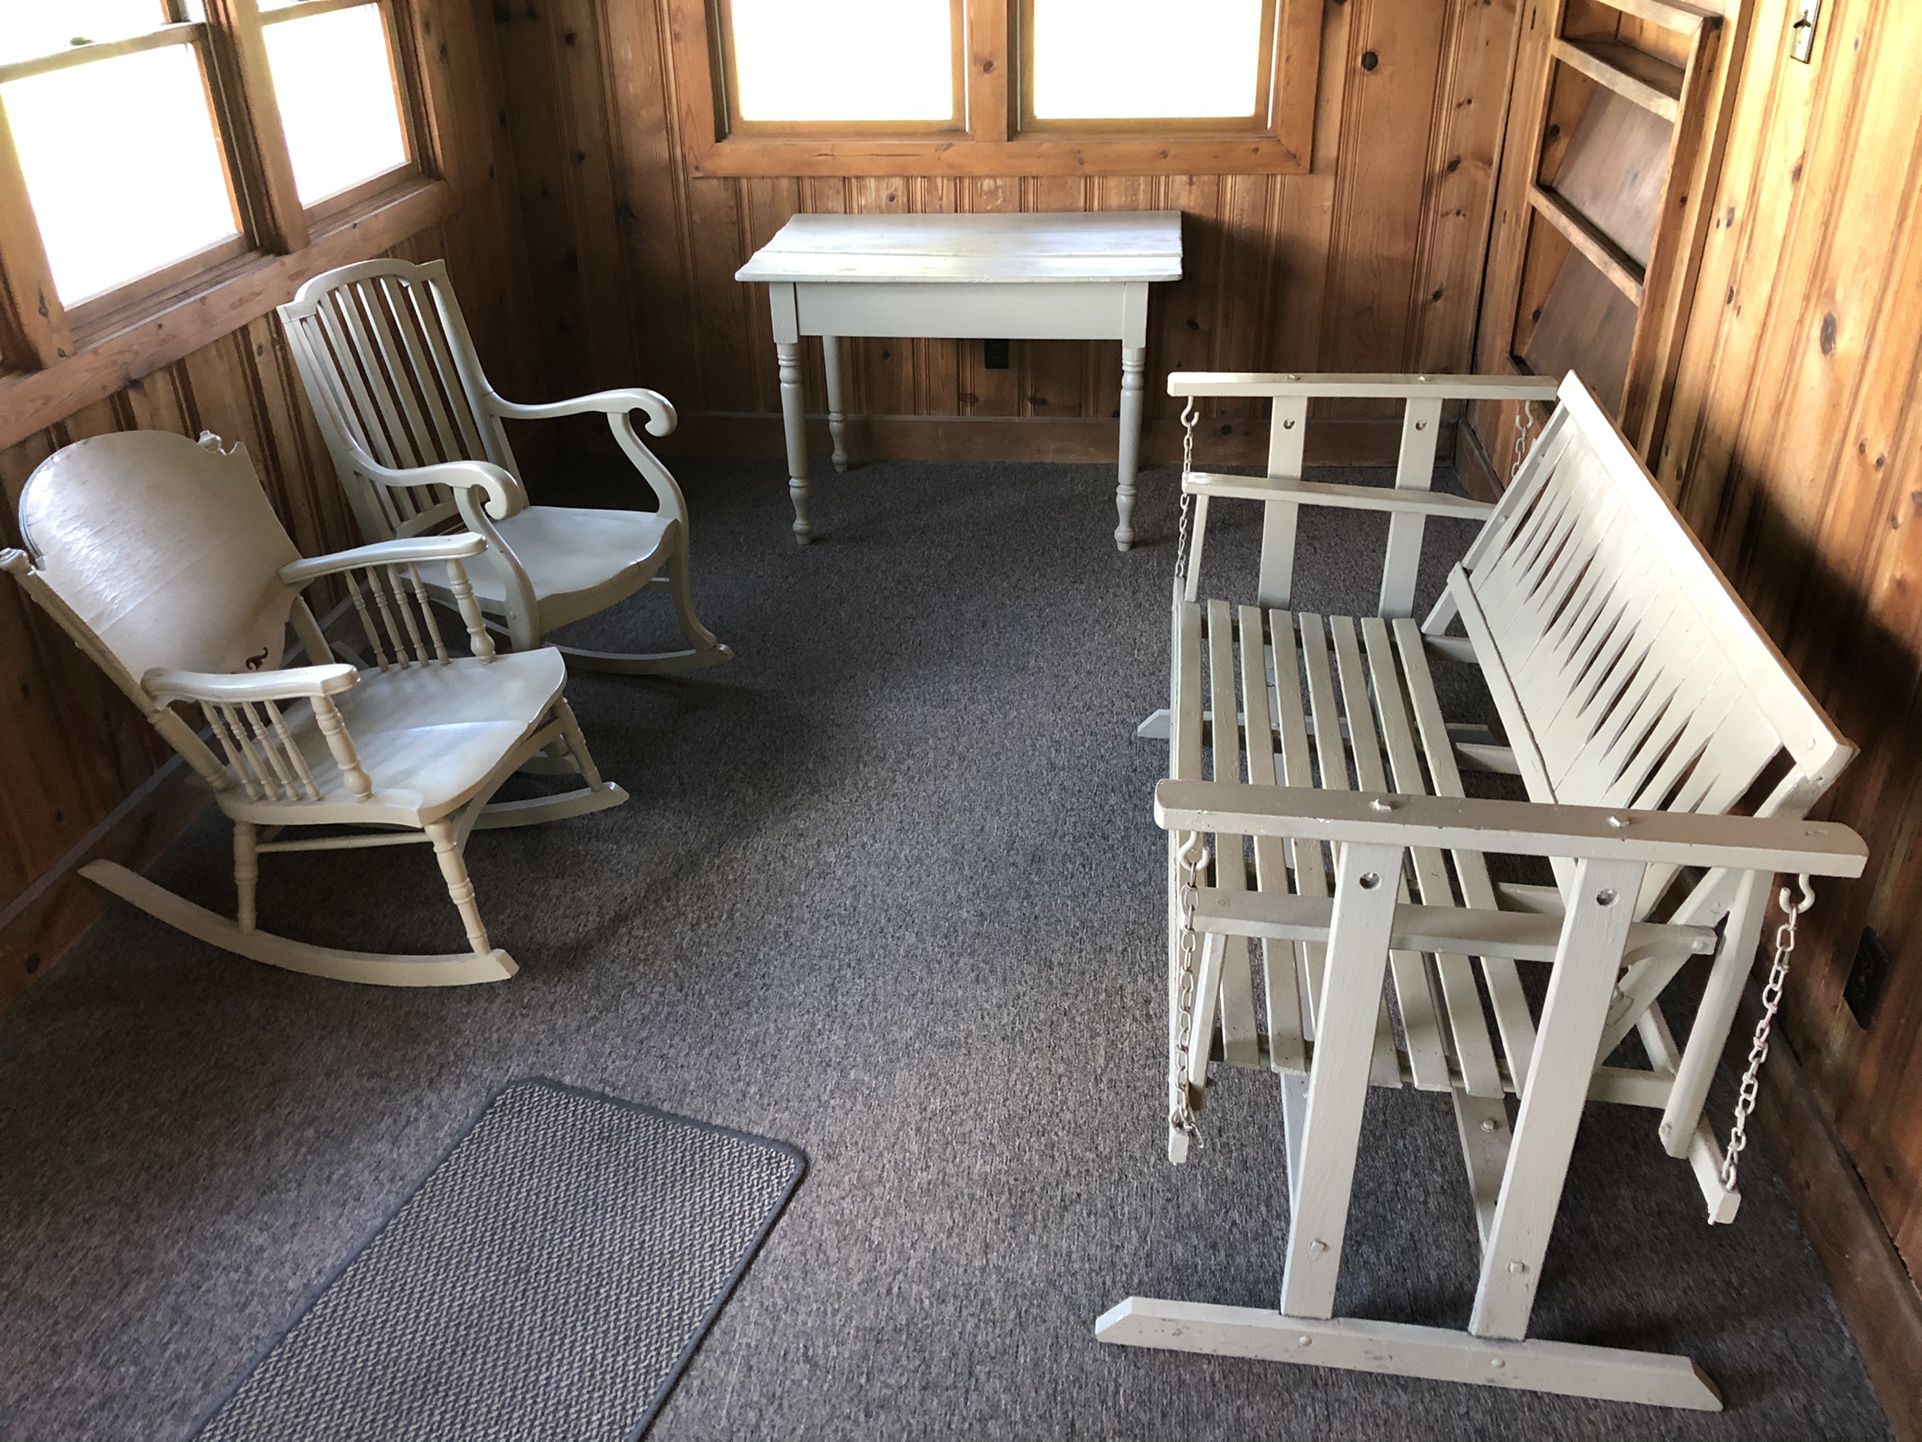 Patio picnic furniture 3-piece set 2 Rocking chairs And One table